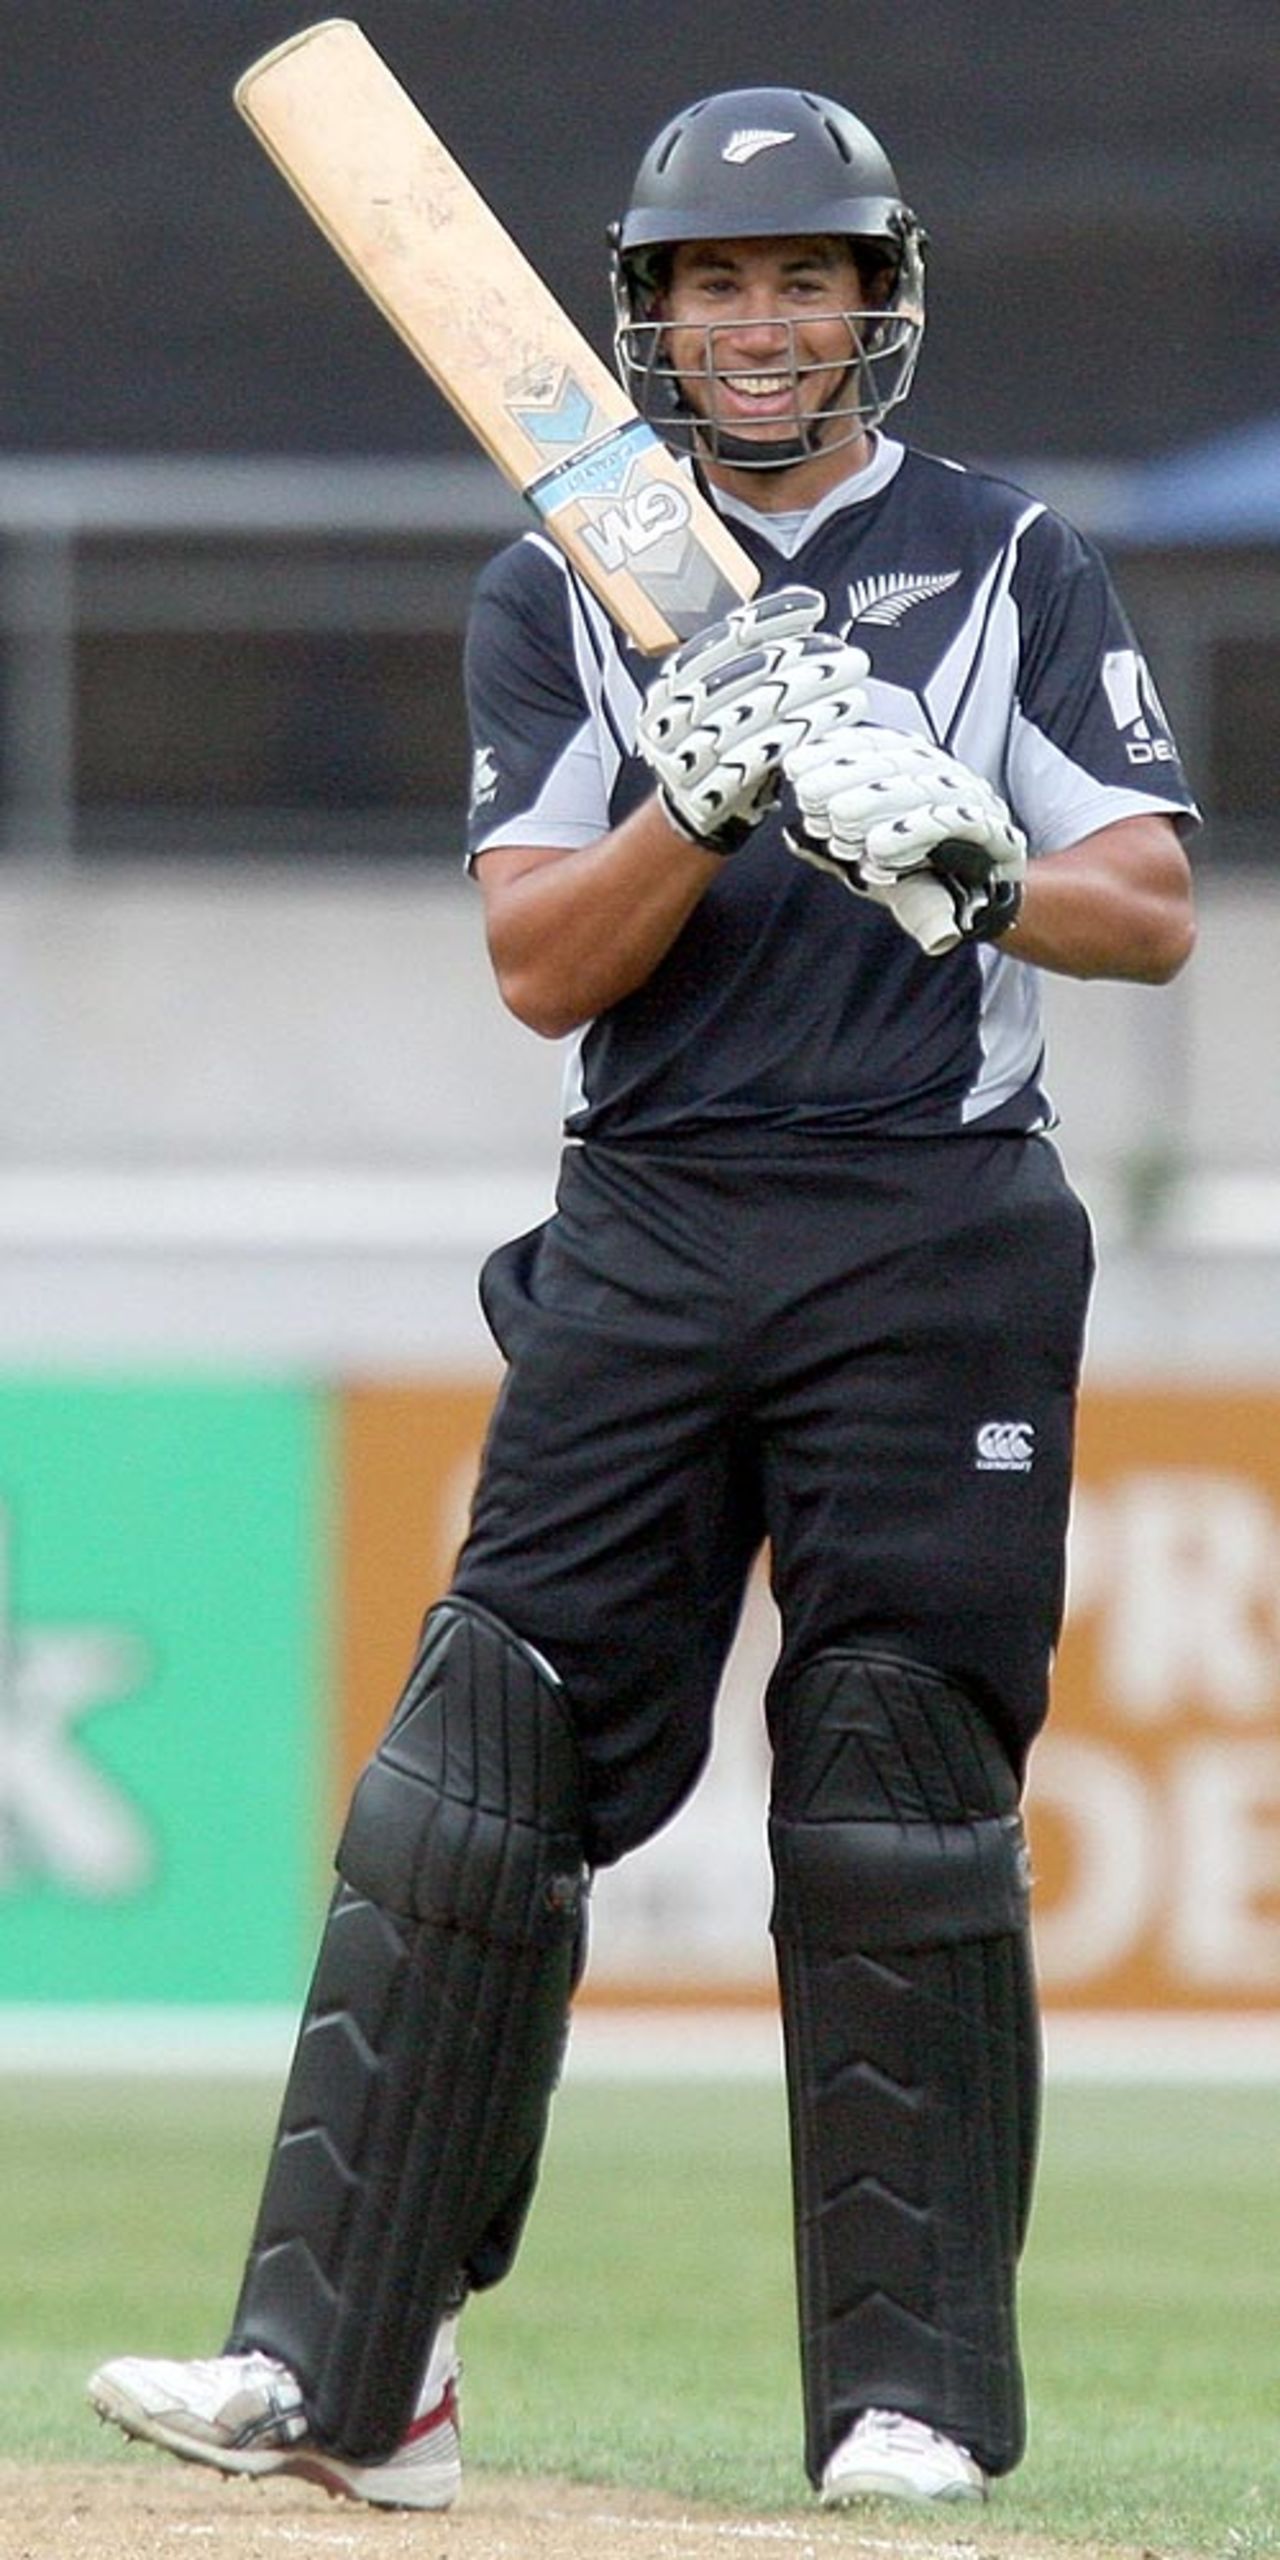 Ross Taylor is all smiles after bringing up his fifty, New Zealand v West Indies, 3rd ODI, Wellington, January 7, 2009